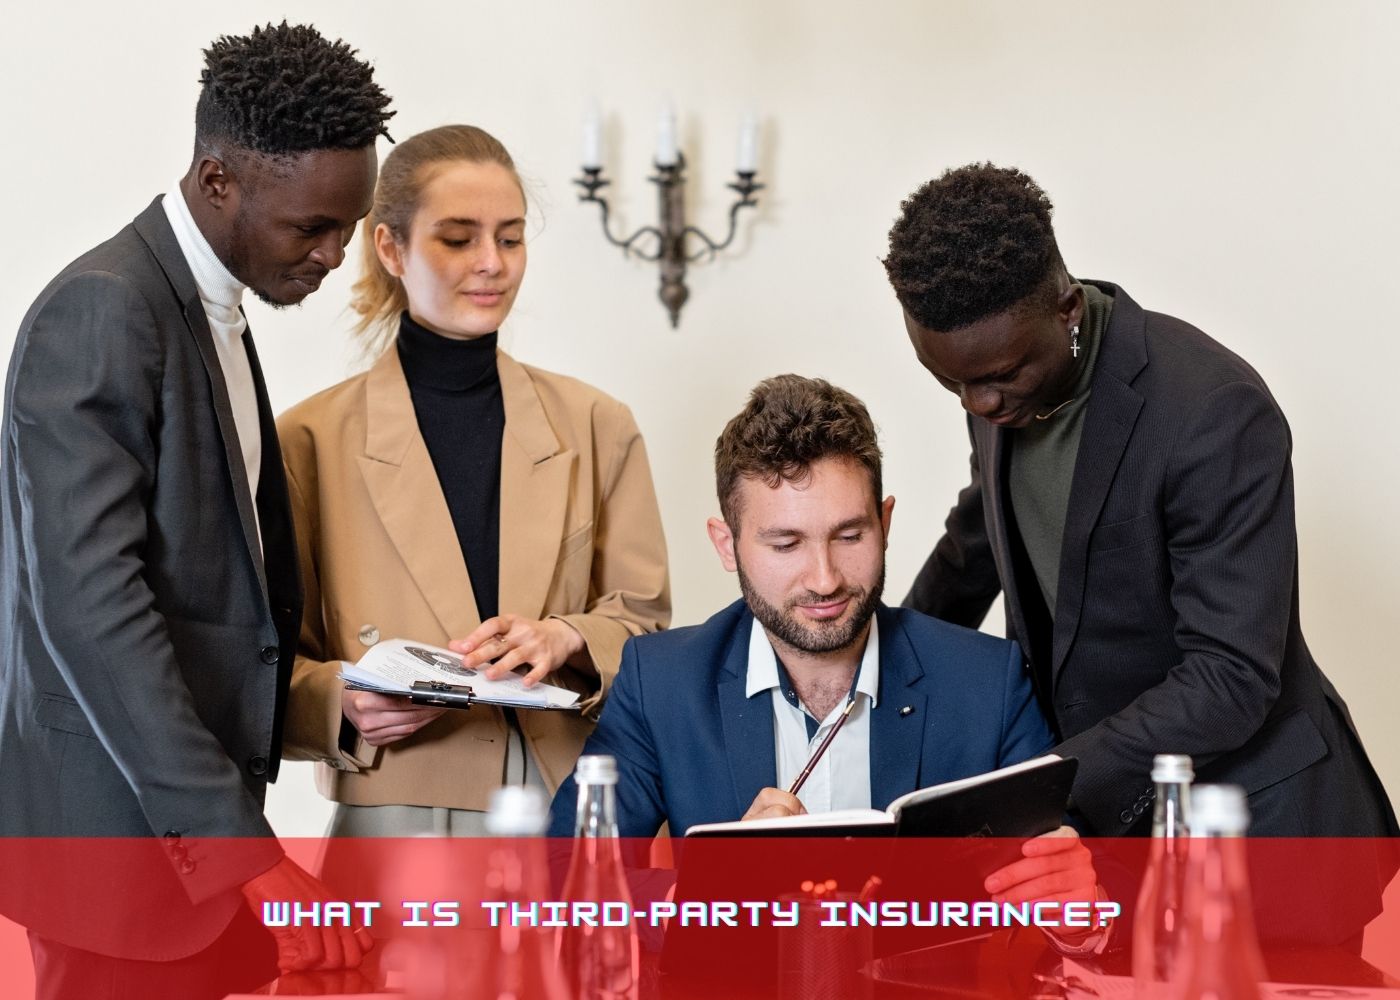 What Is Third-Party Insurance? 